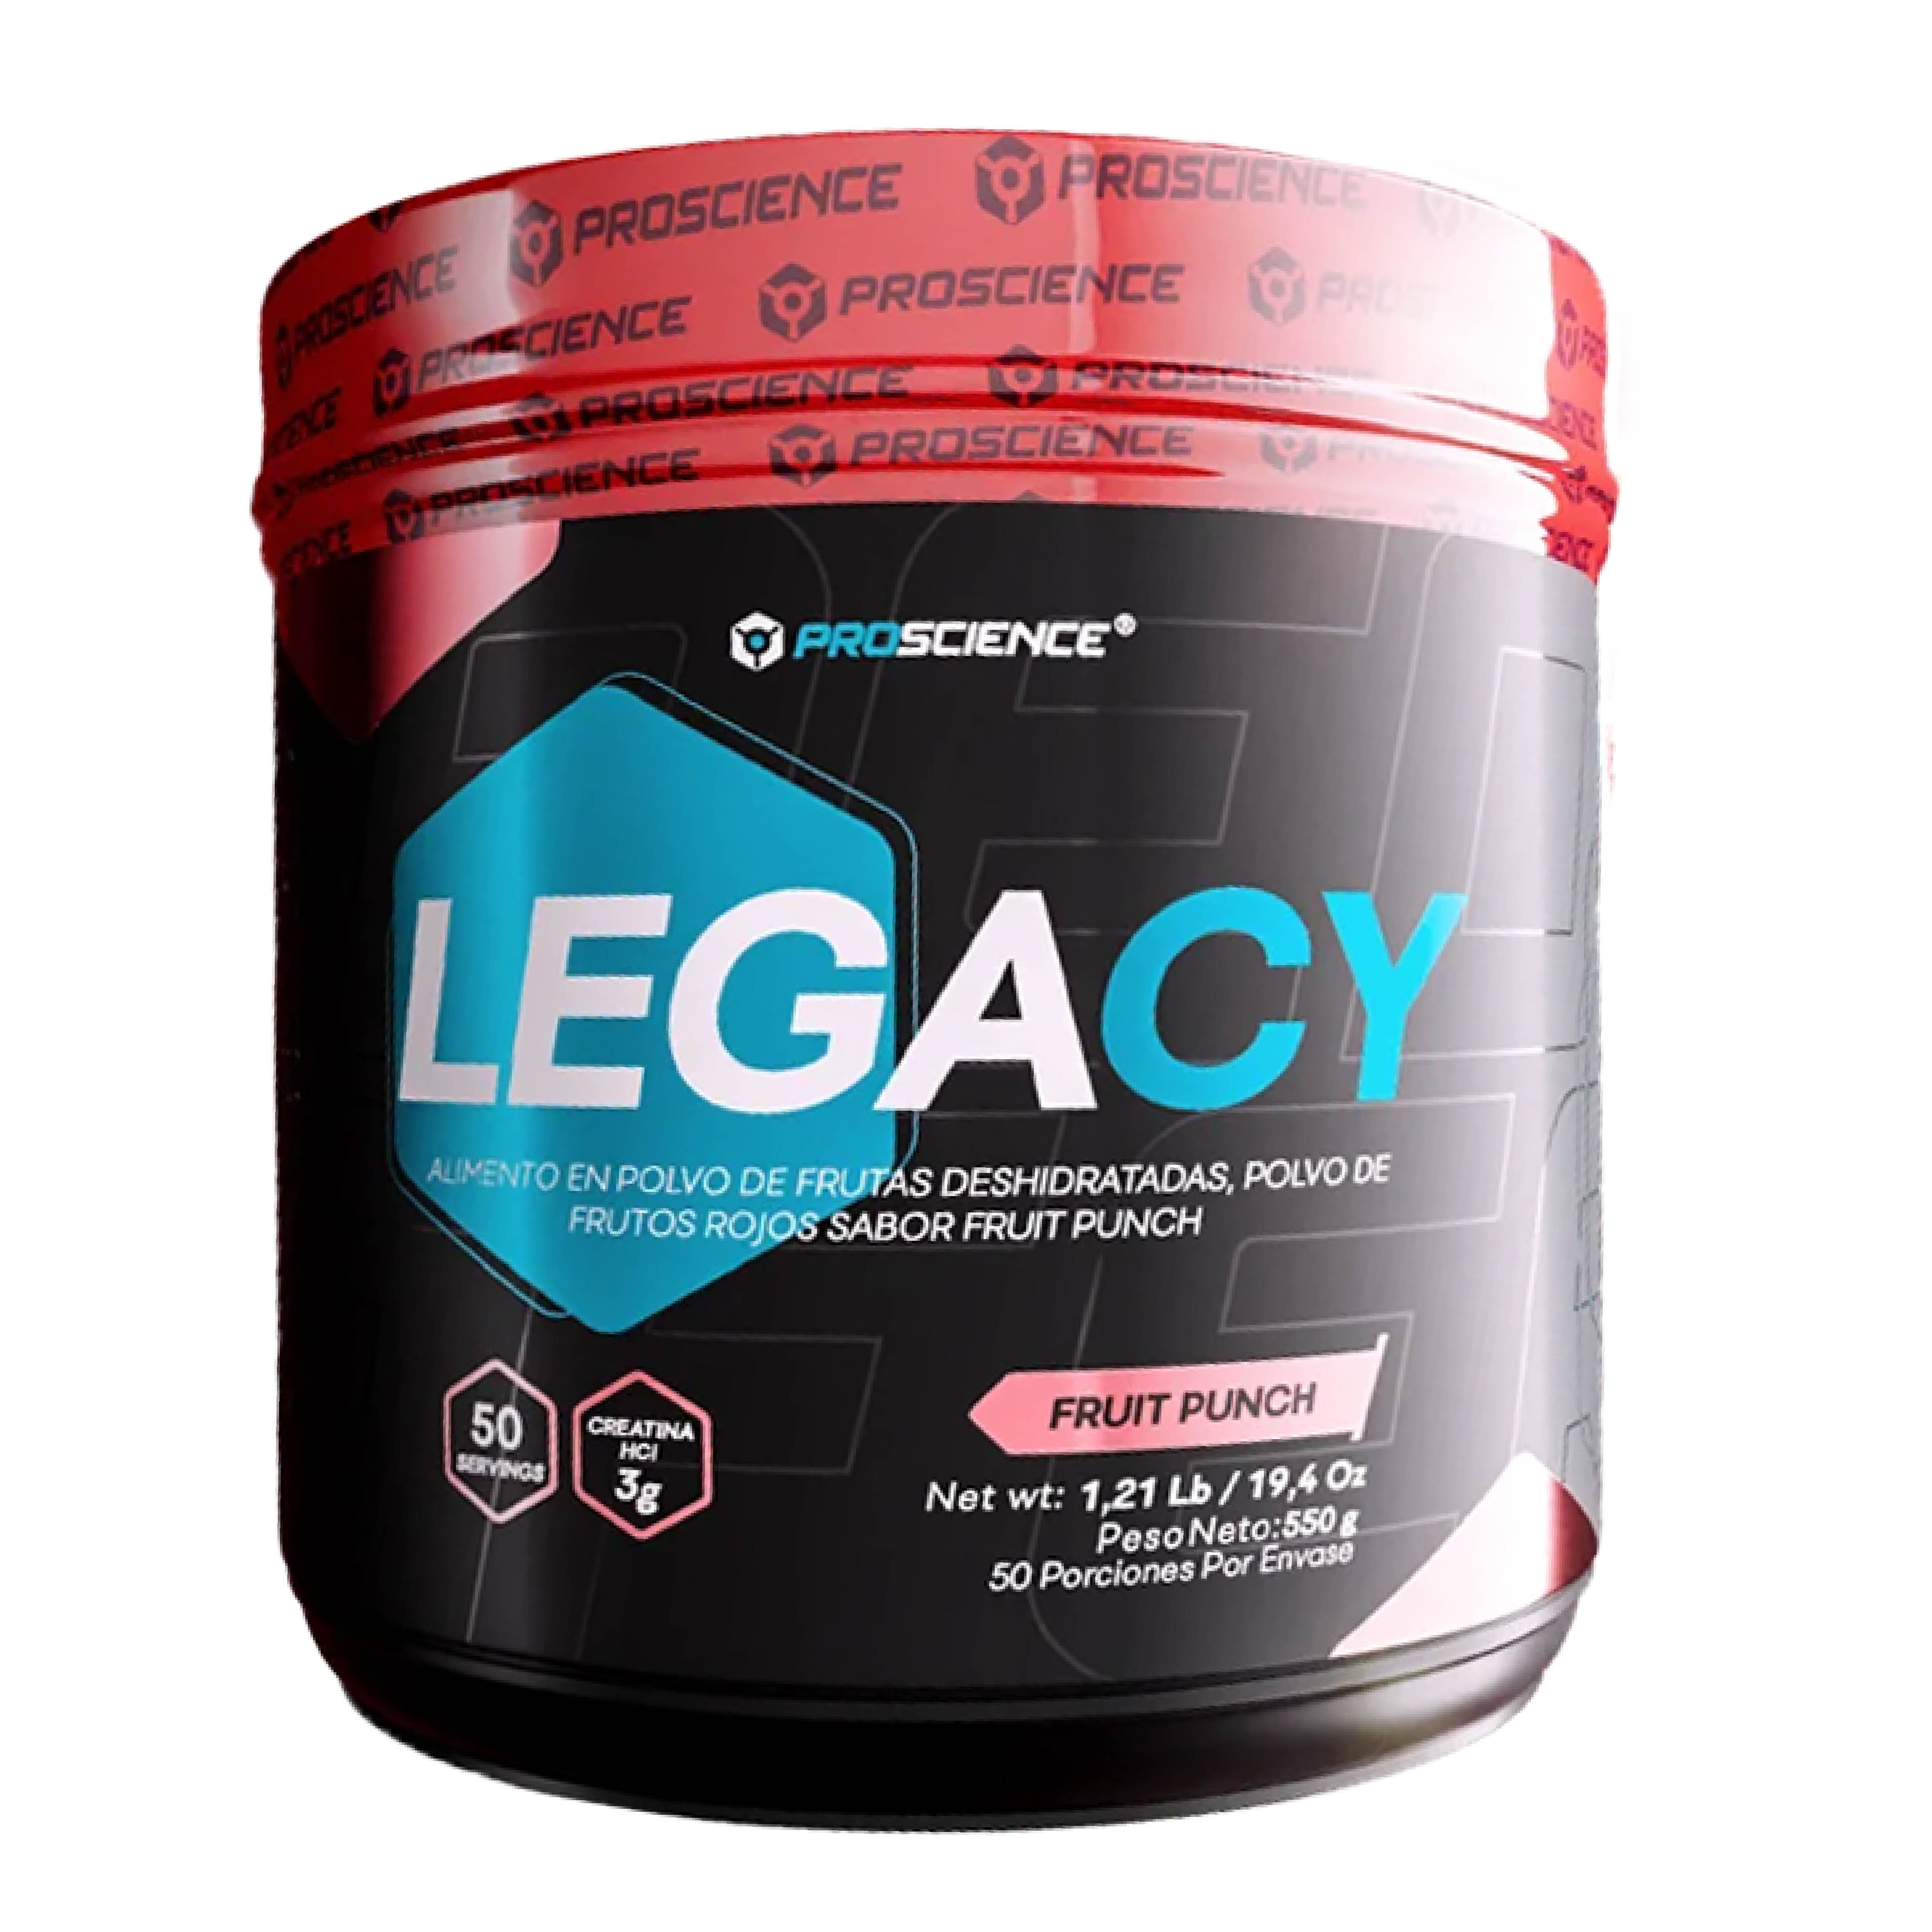 LEGACY FRUIT PUNCH – PROSCIENCE 50 SERVICIOS